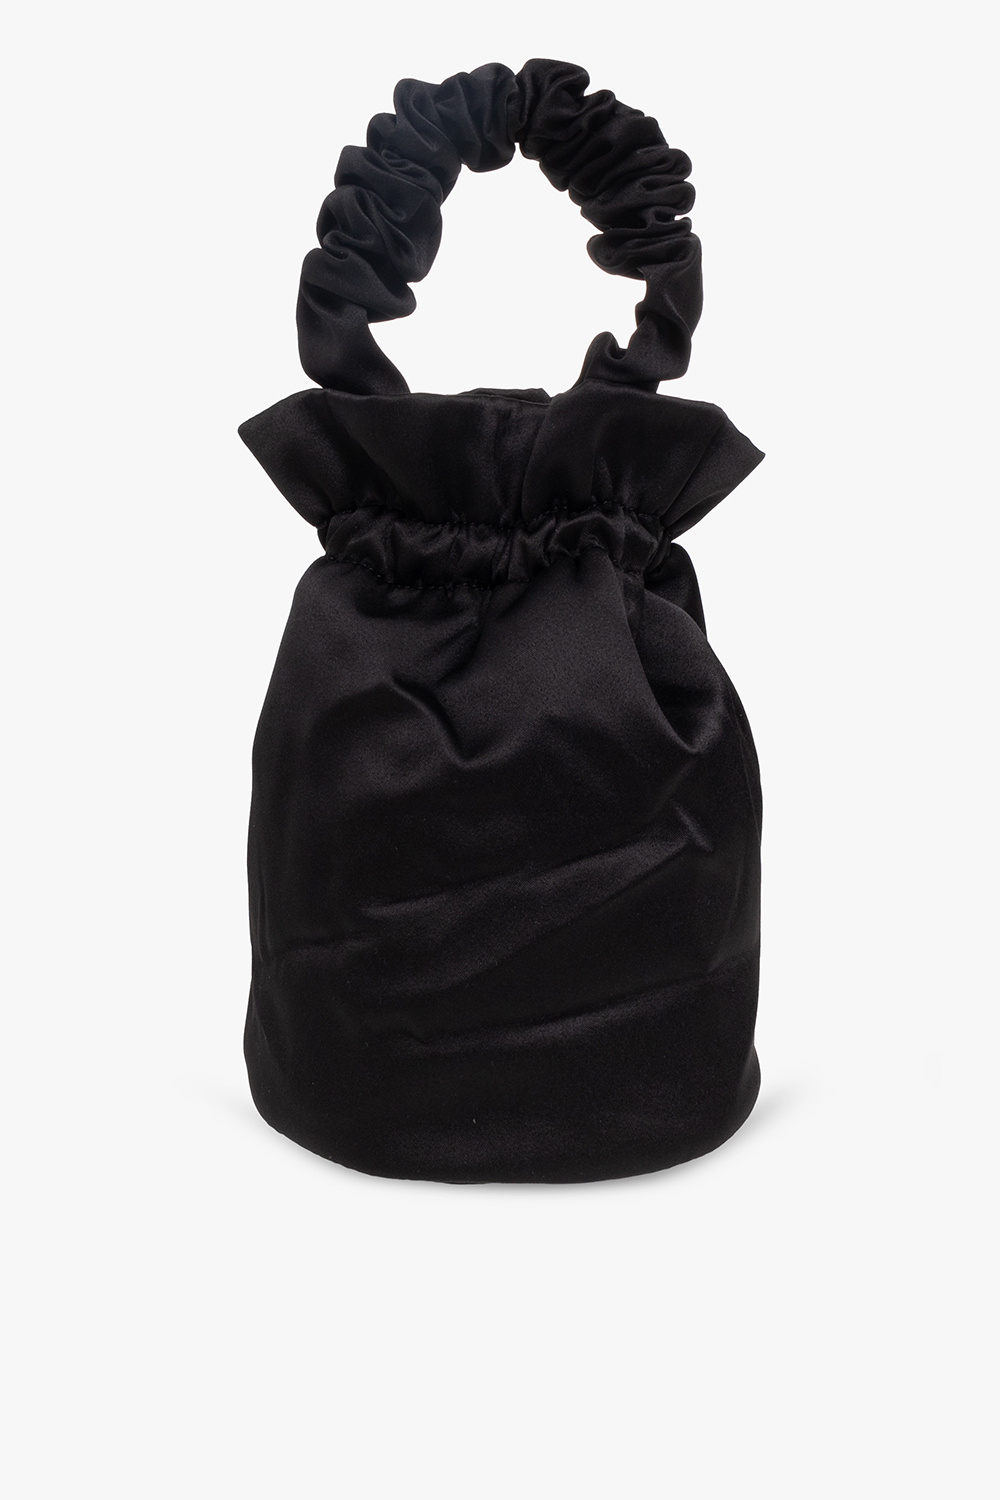 Ganni this black box small bag from